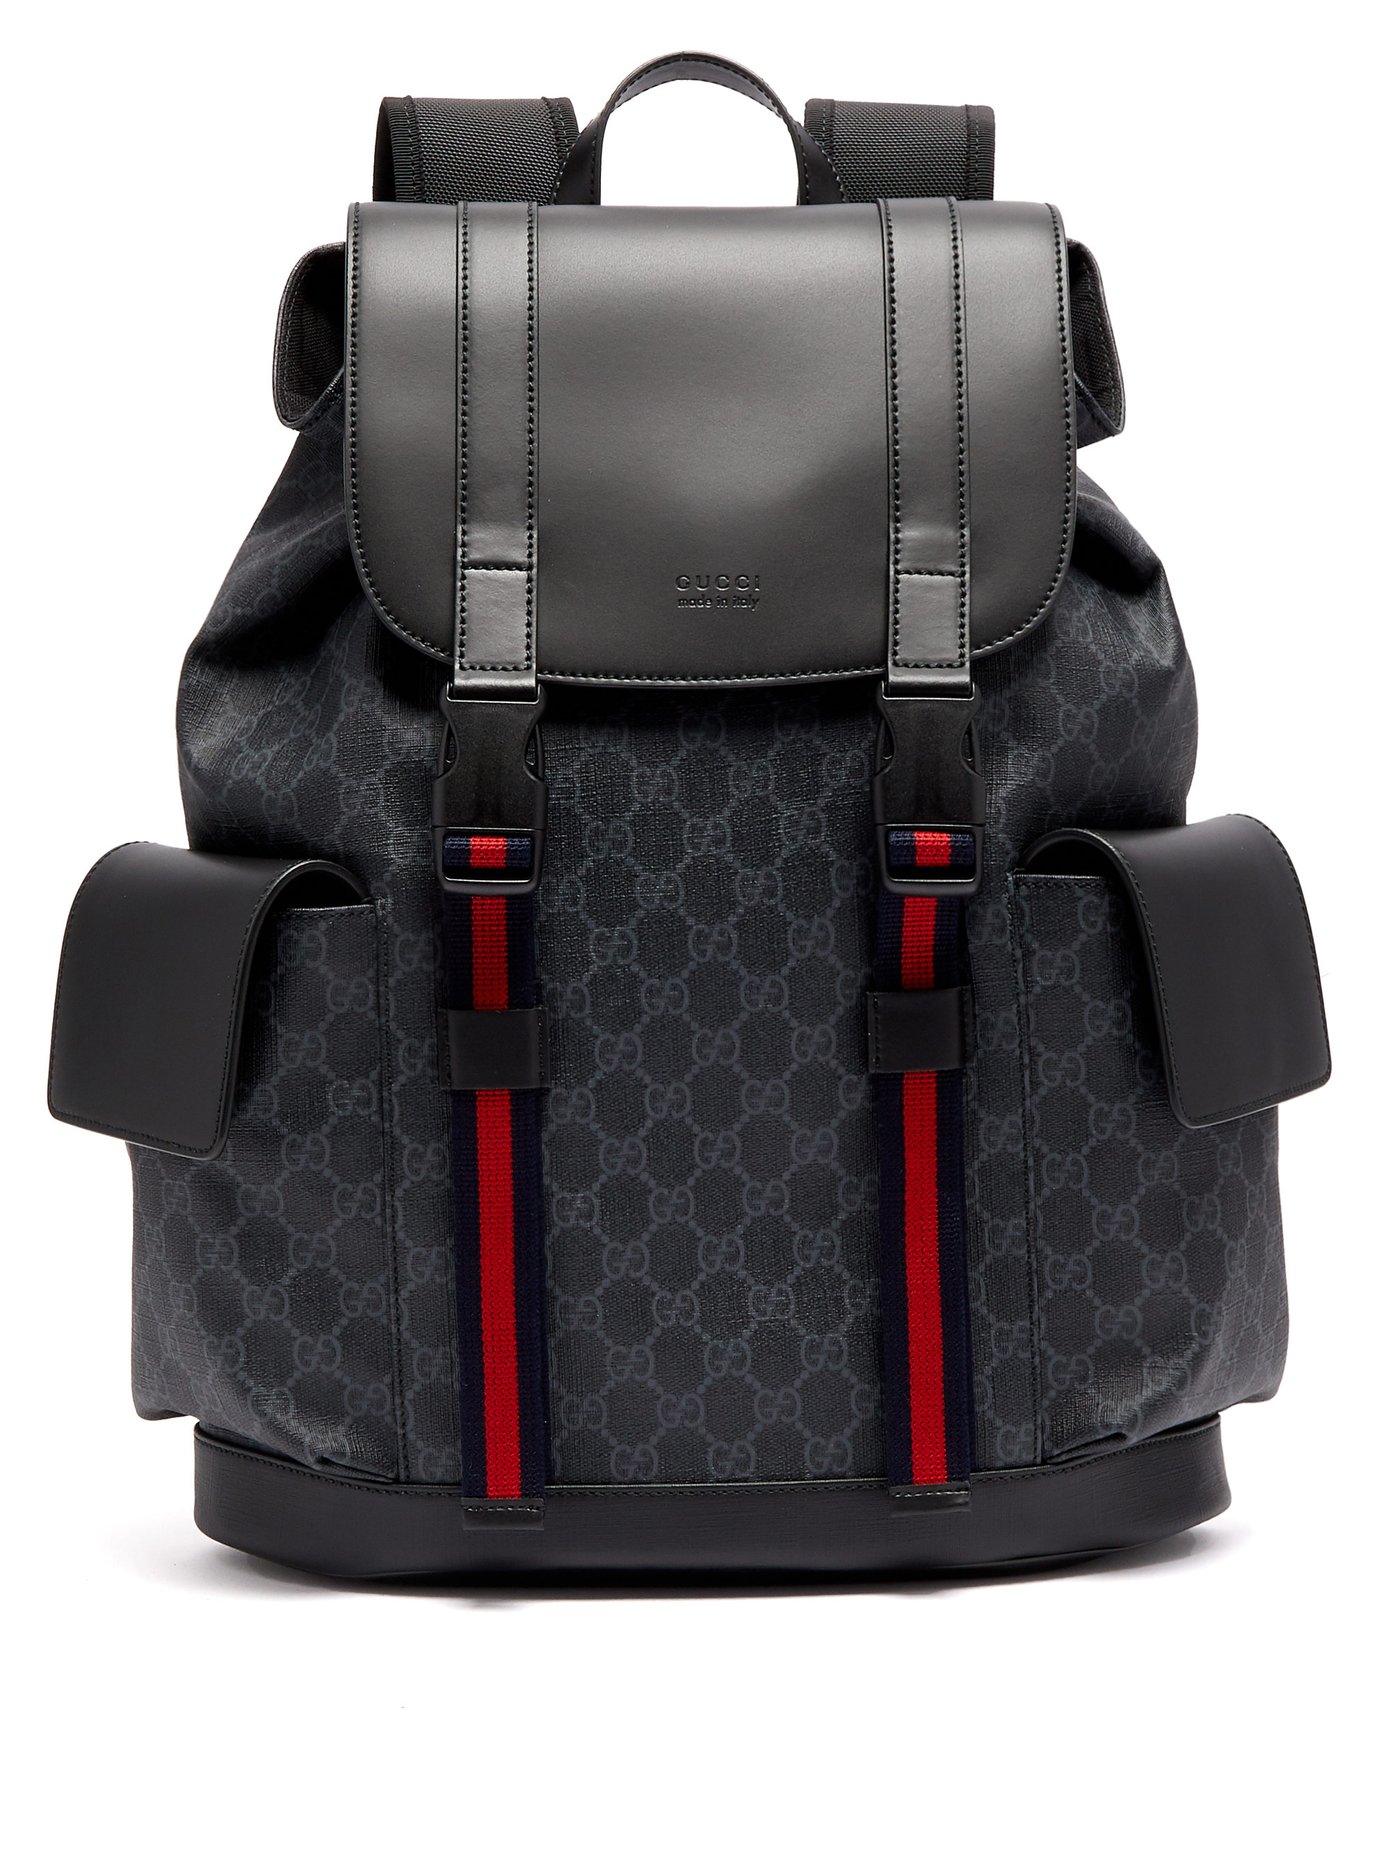 Leather Supreme Backpack Hotsell, 57% OFF | lagence.tv